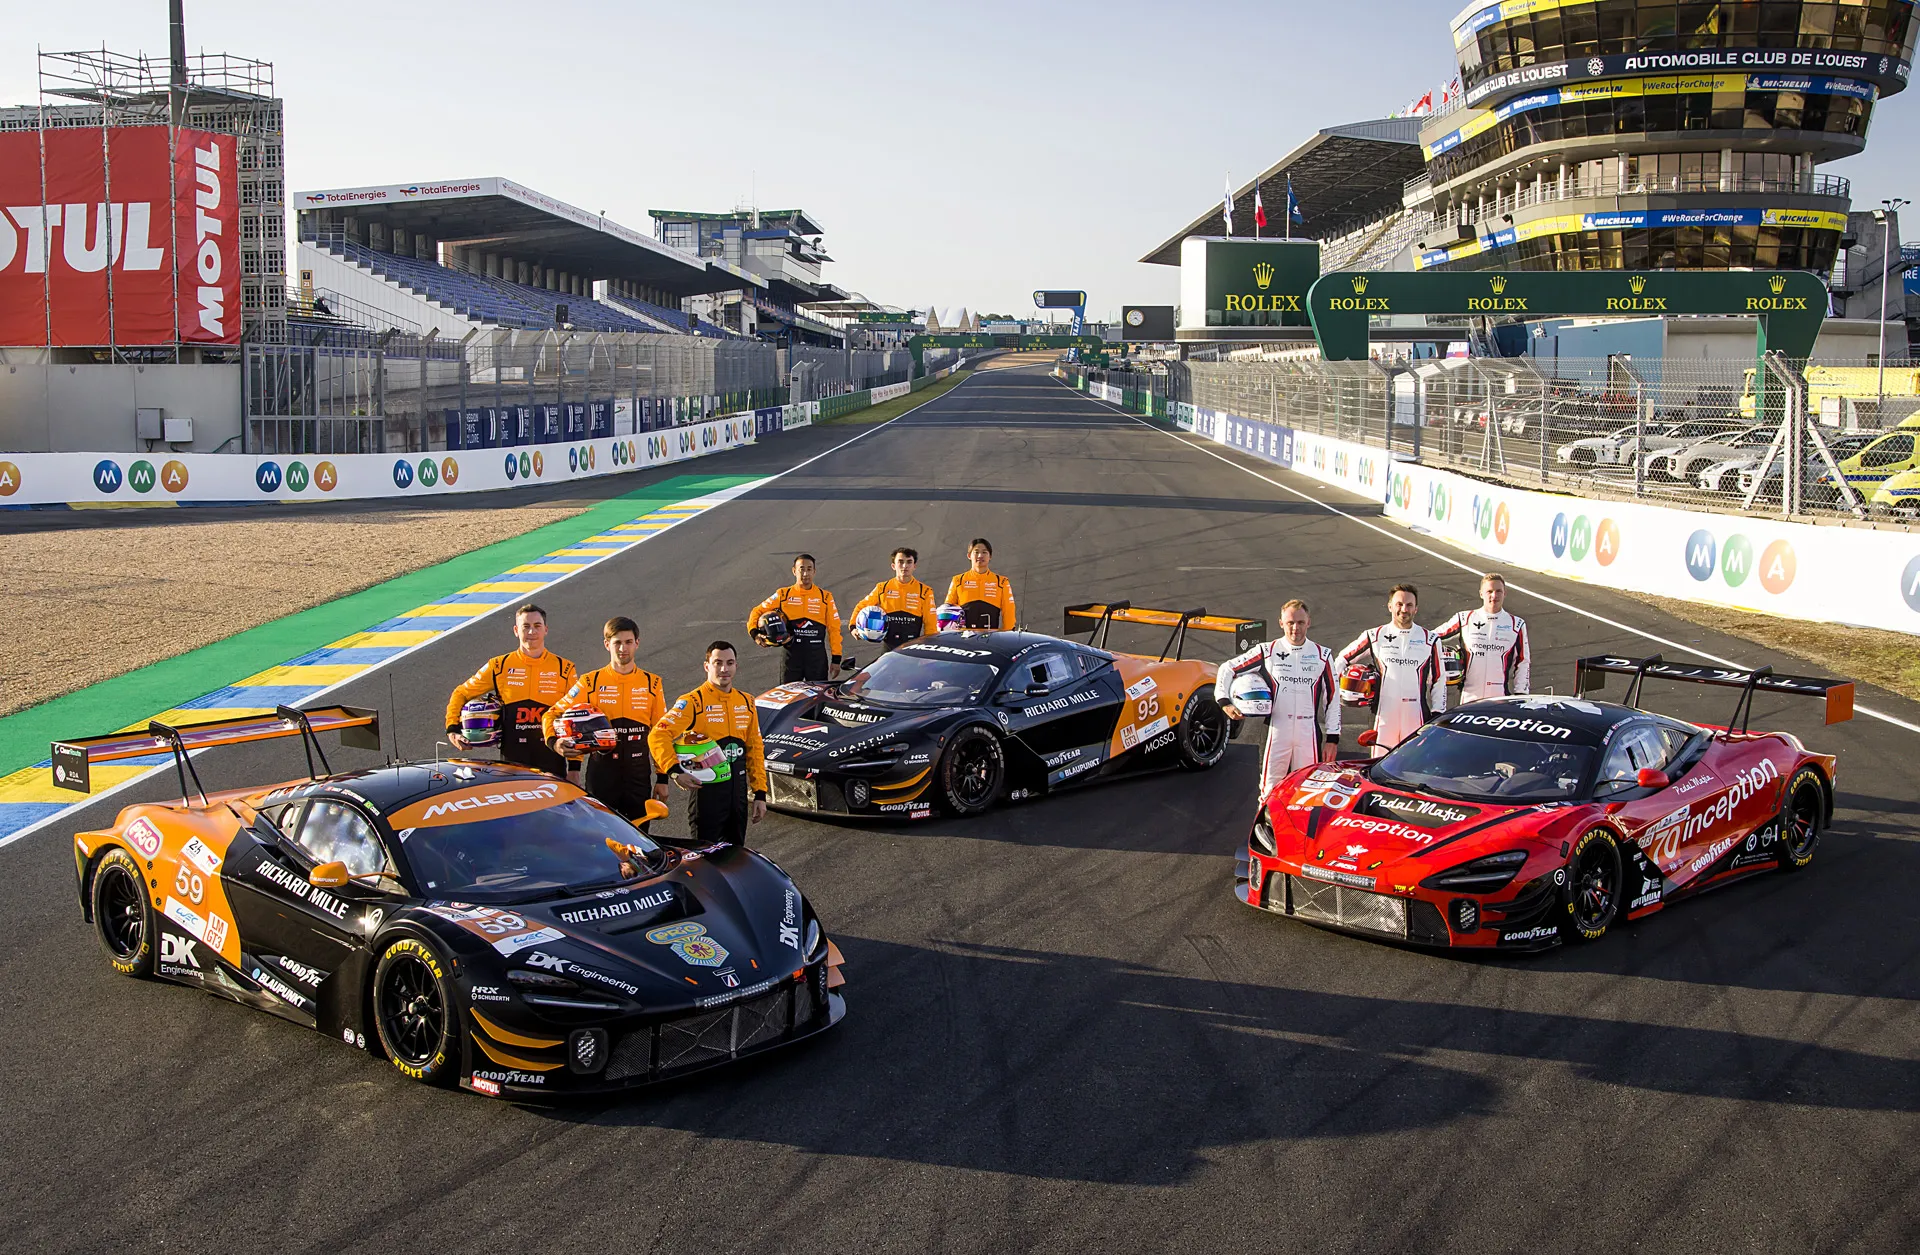 McLaren returns to the 24 Hours of Le Mans after 26 years